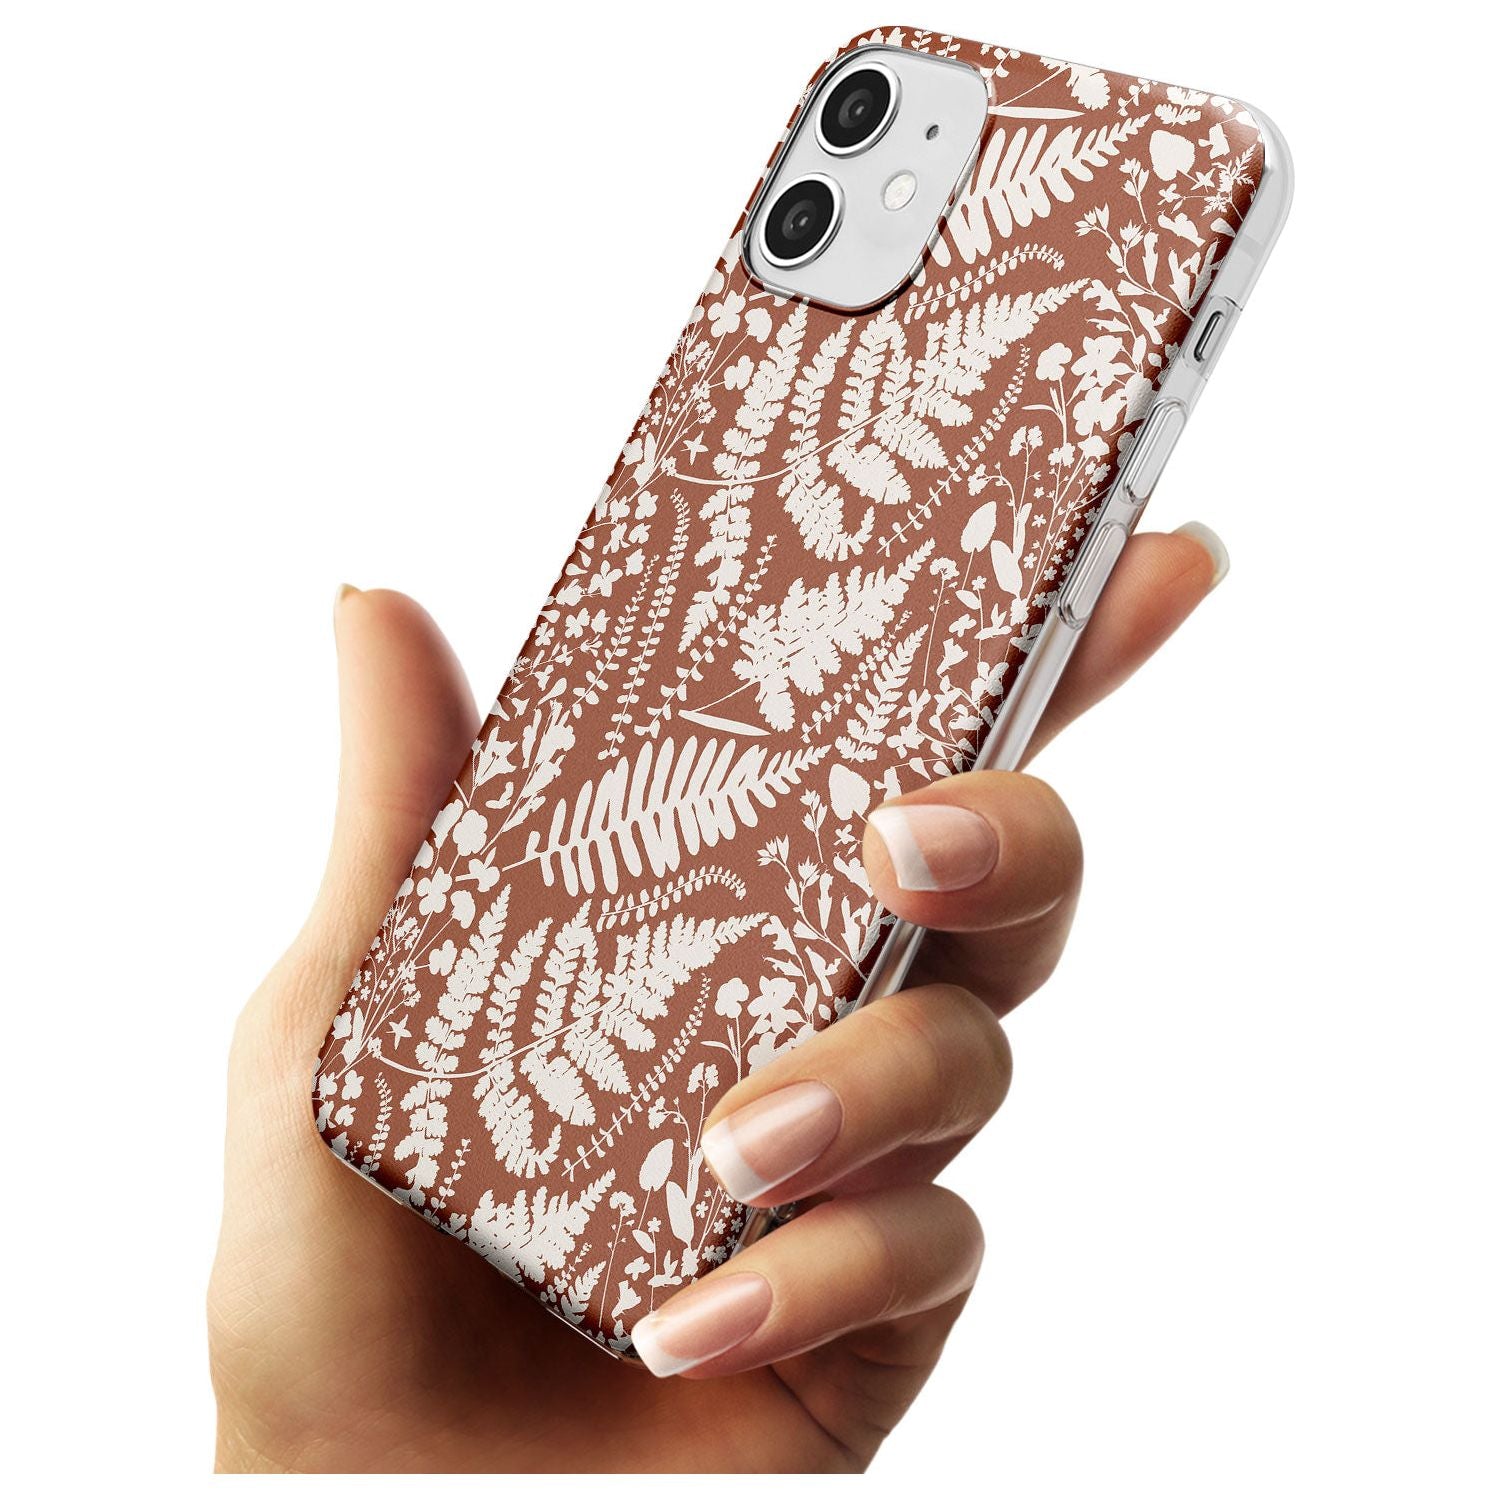 Wildflowers and Ferns on Terracotta Slim TPU Phone Case for iPhone 11